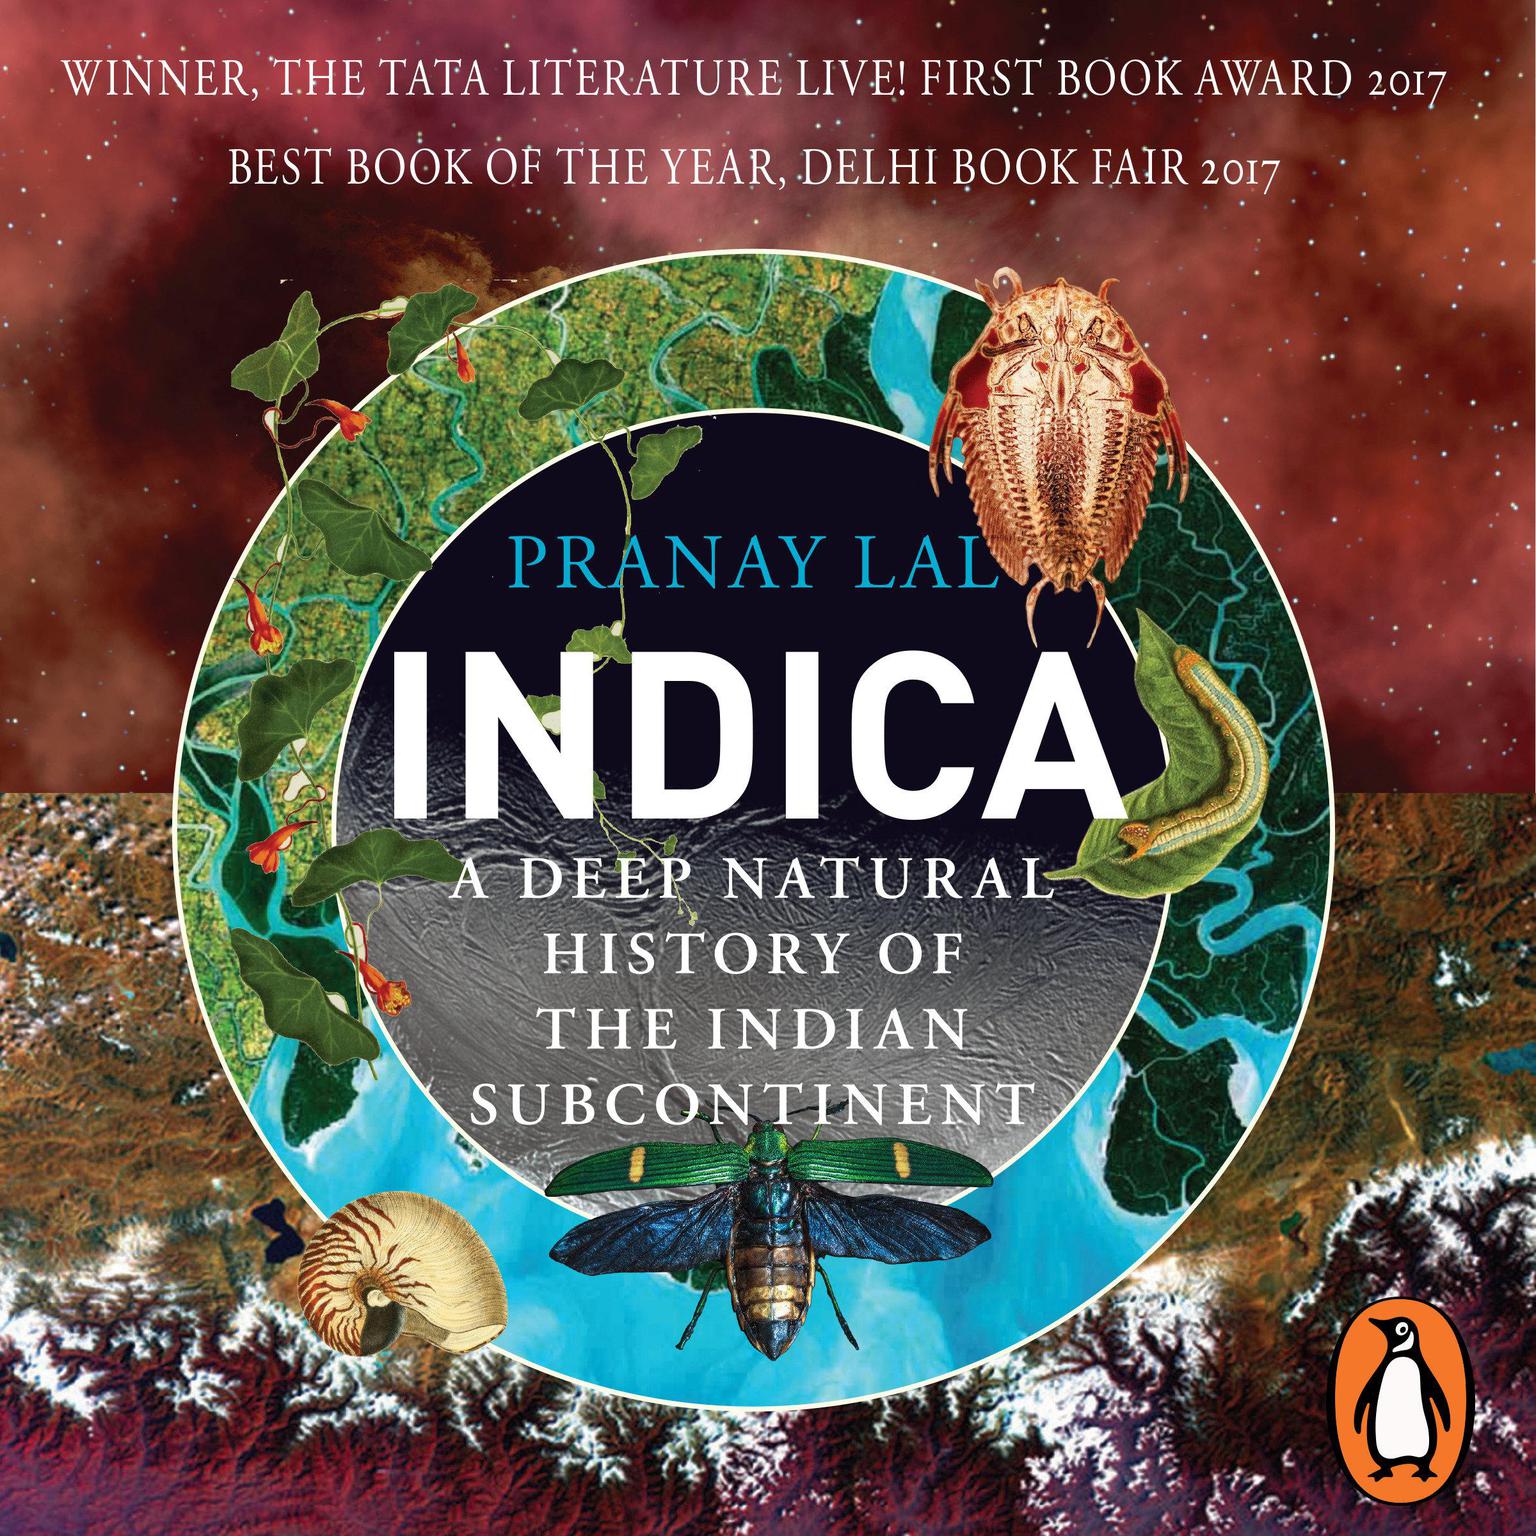 Indica: A Deep Natural History of the Indian Subcontinent: A Deep Natural History of the Indian Subcontinent Audiobook, by Pranay Lal